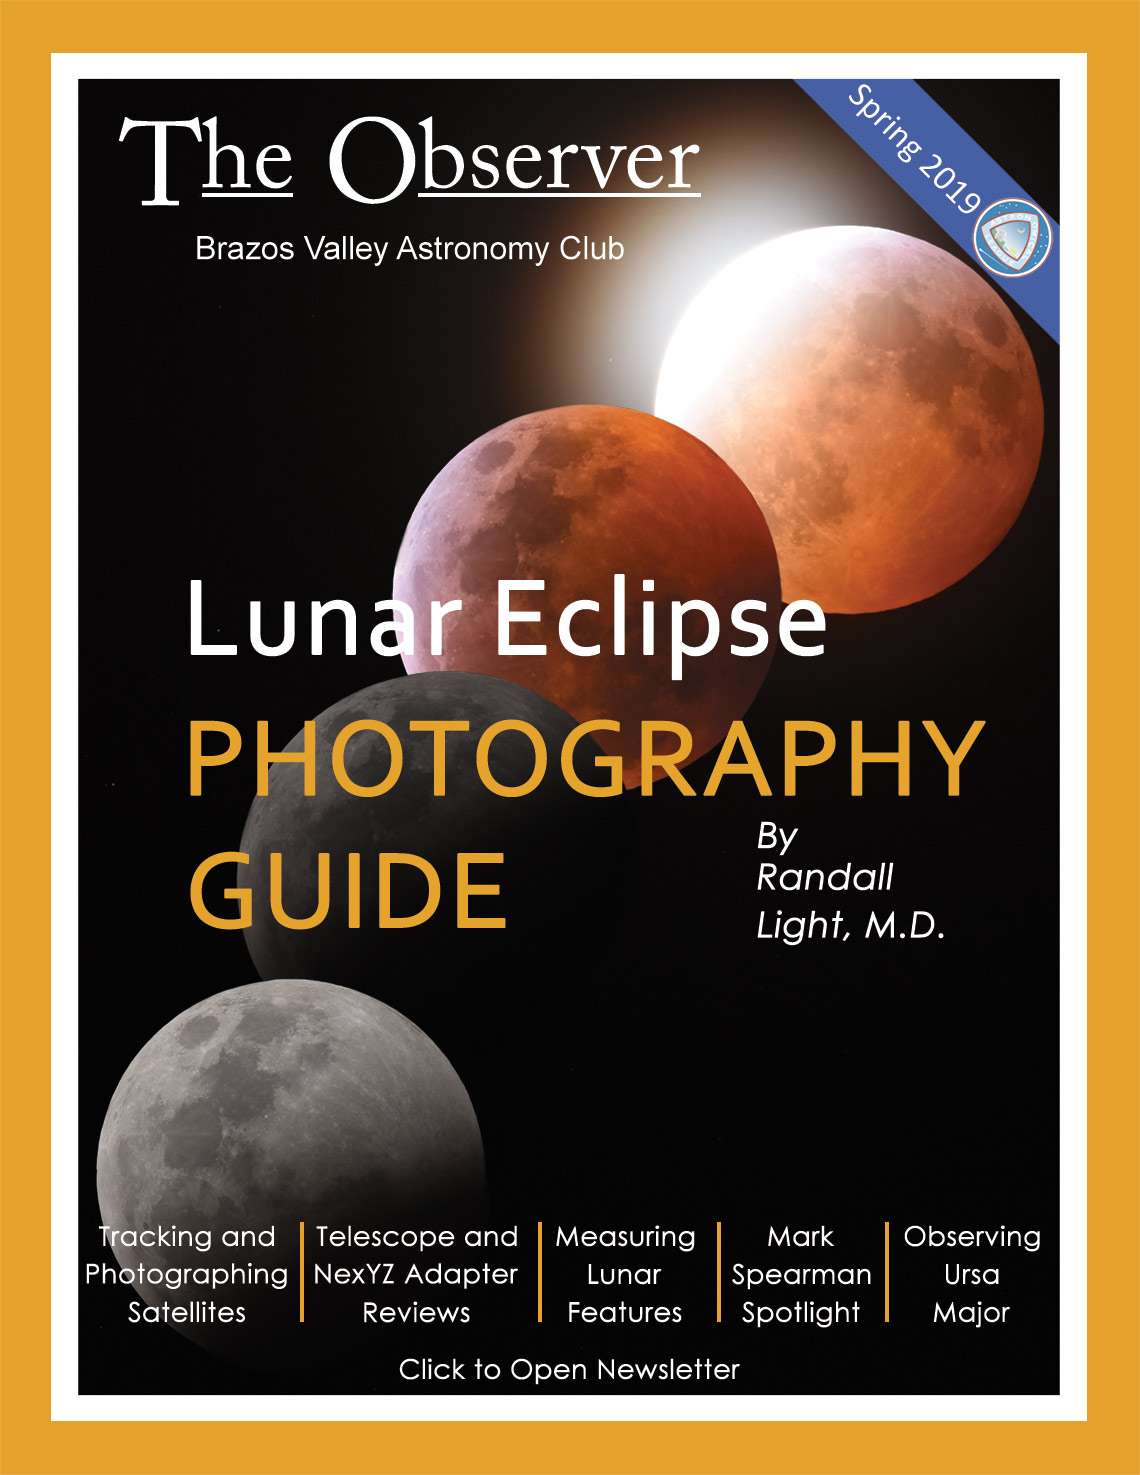 Lunar Eclipse Photography Guide